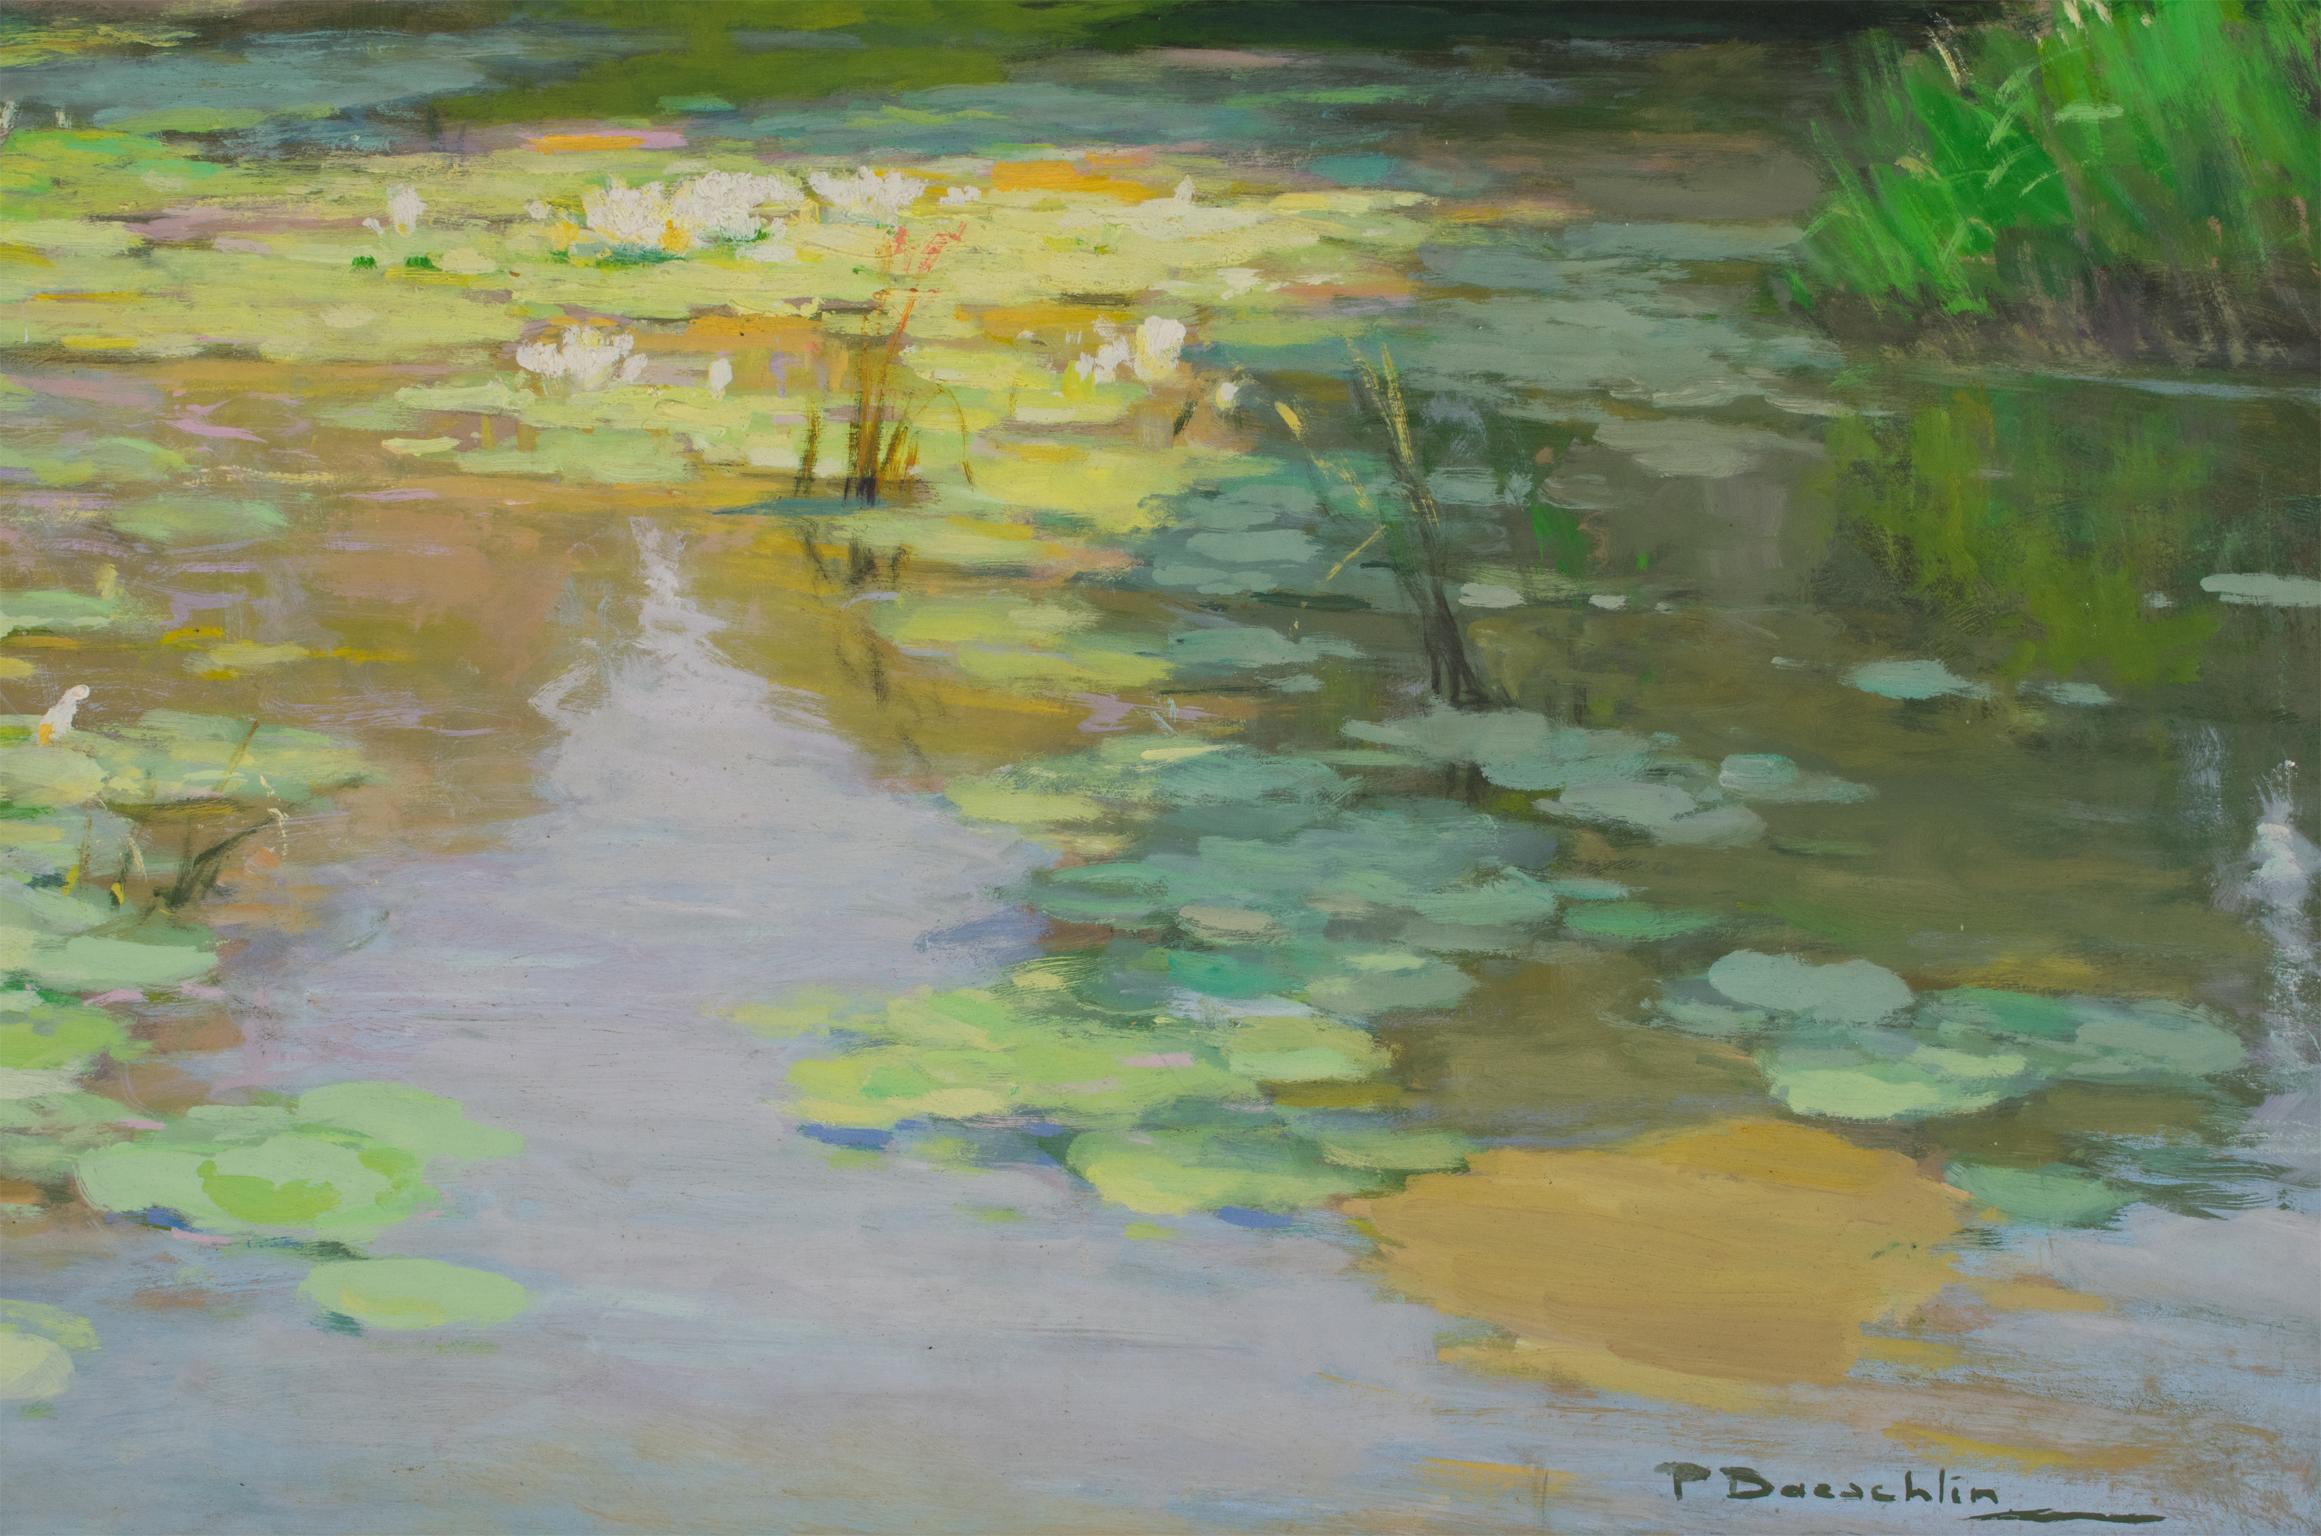 The Water Lilies, Oil on Masonite Board Painting by Pierre Laurent Baeschlin 7